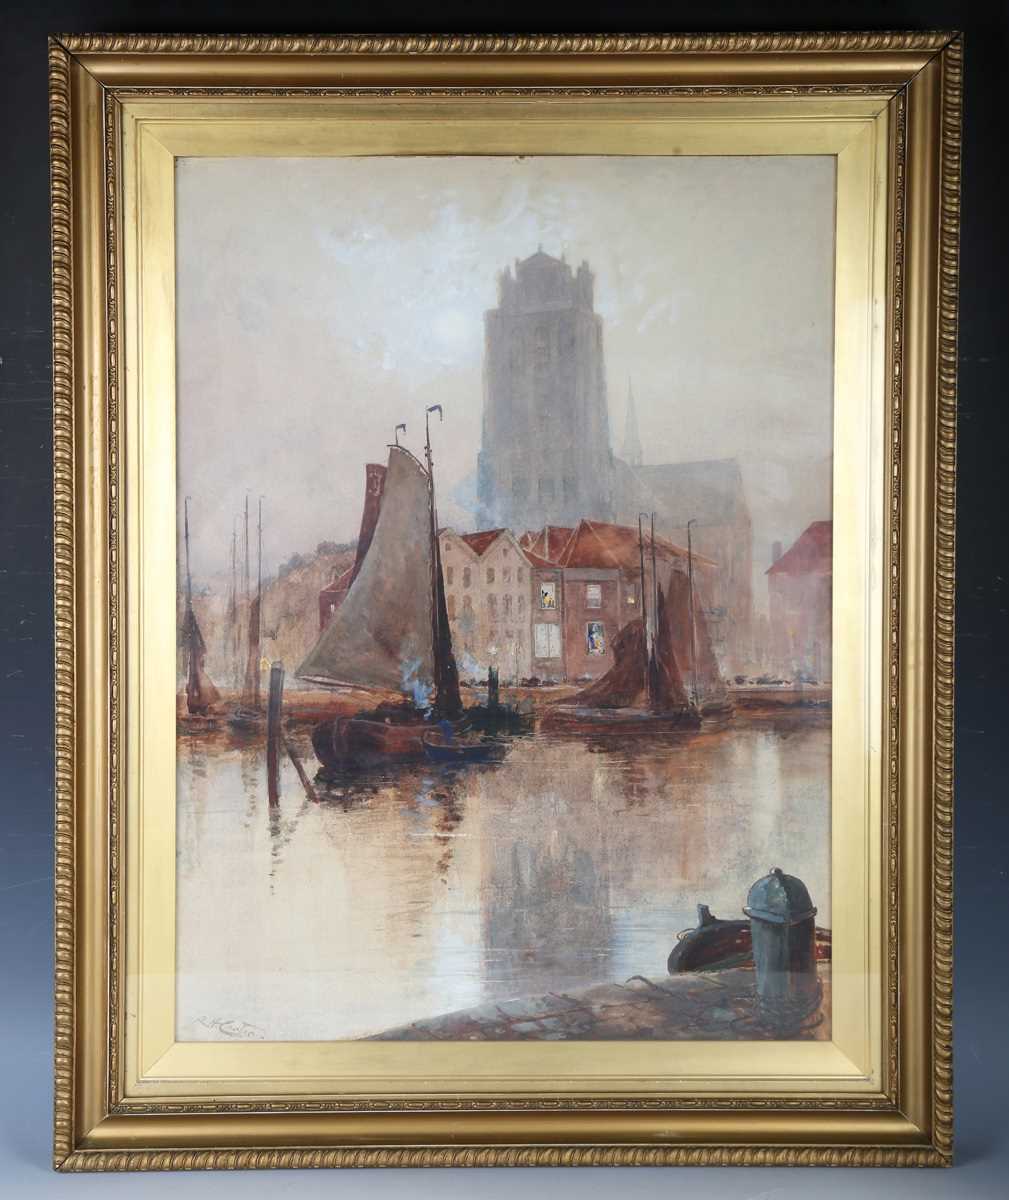 Richard Harry Carter – ‘The Groot Kerk, Dordrecht’, watercolour, signed recto, titled and dated 1903 - Image 2 of 5